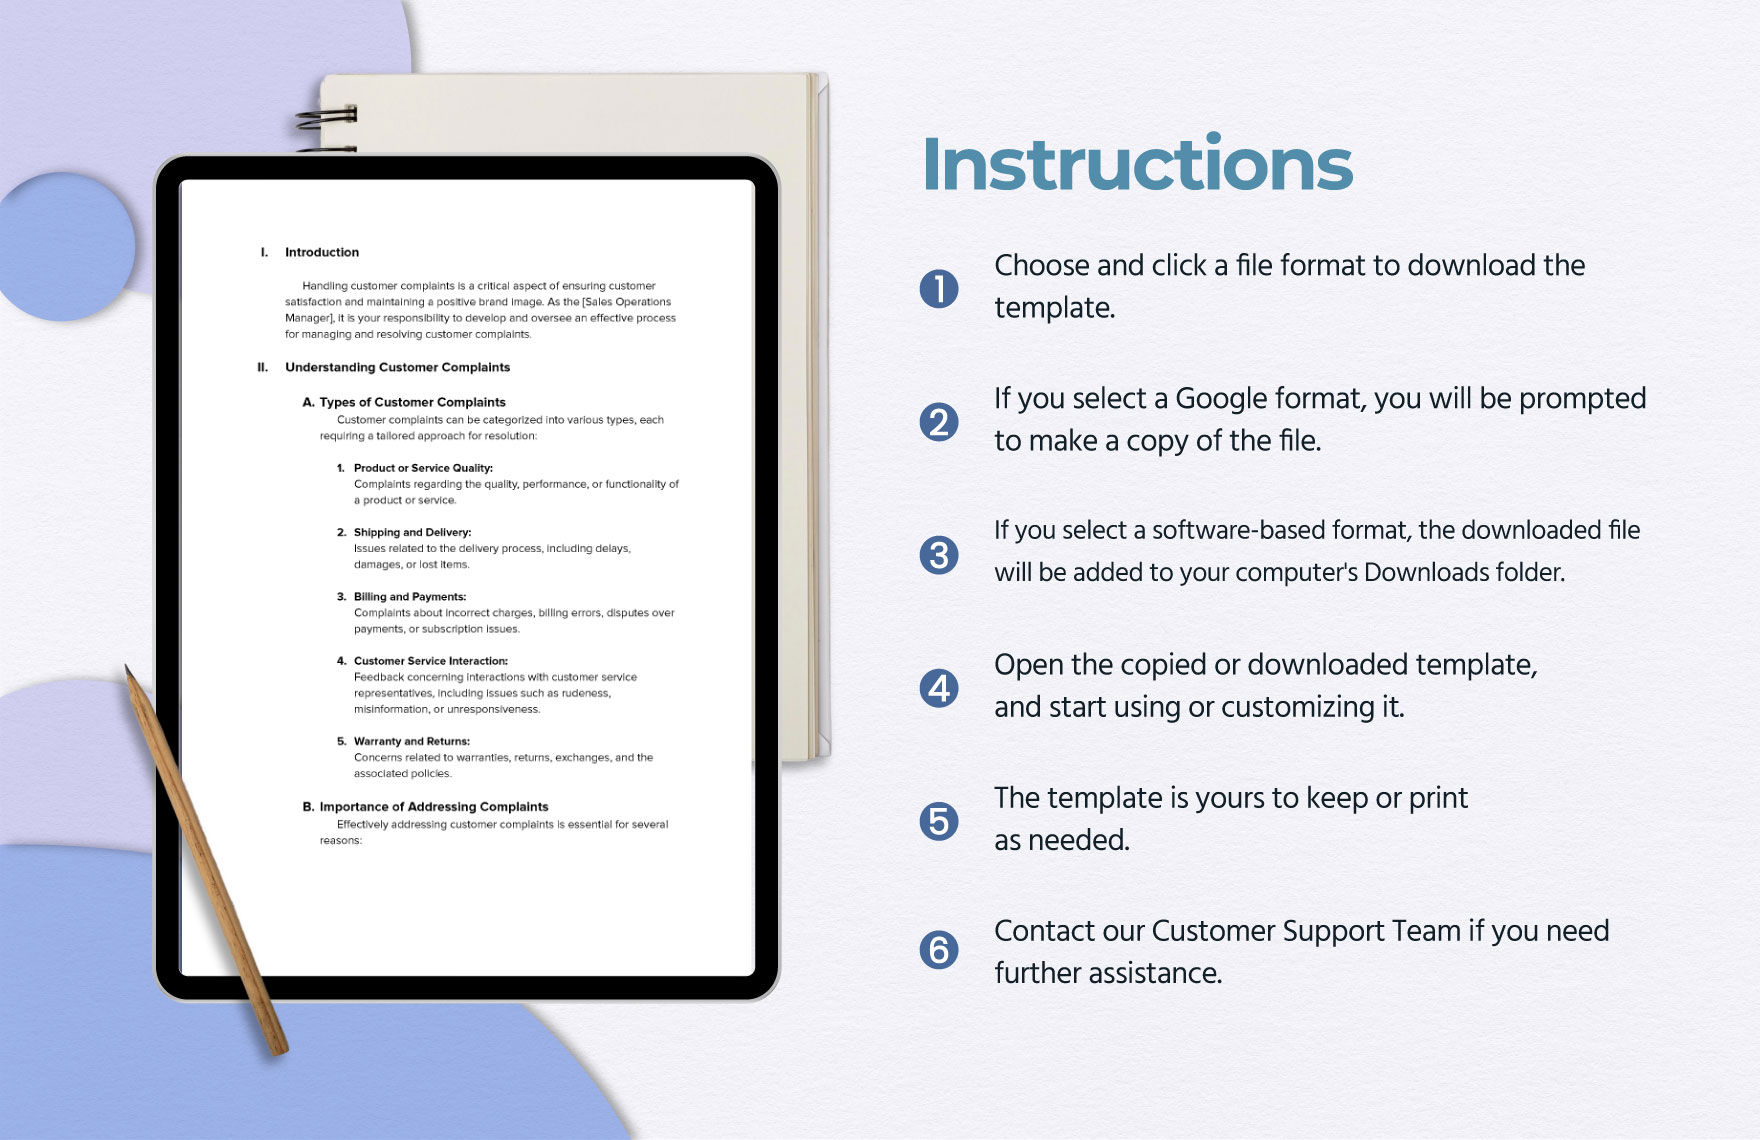 Sales Manual for Handling Customer Complaints Template